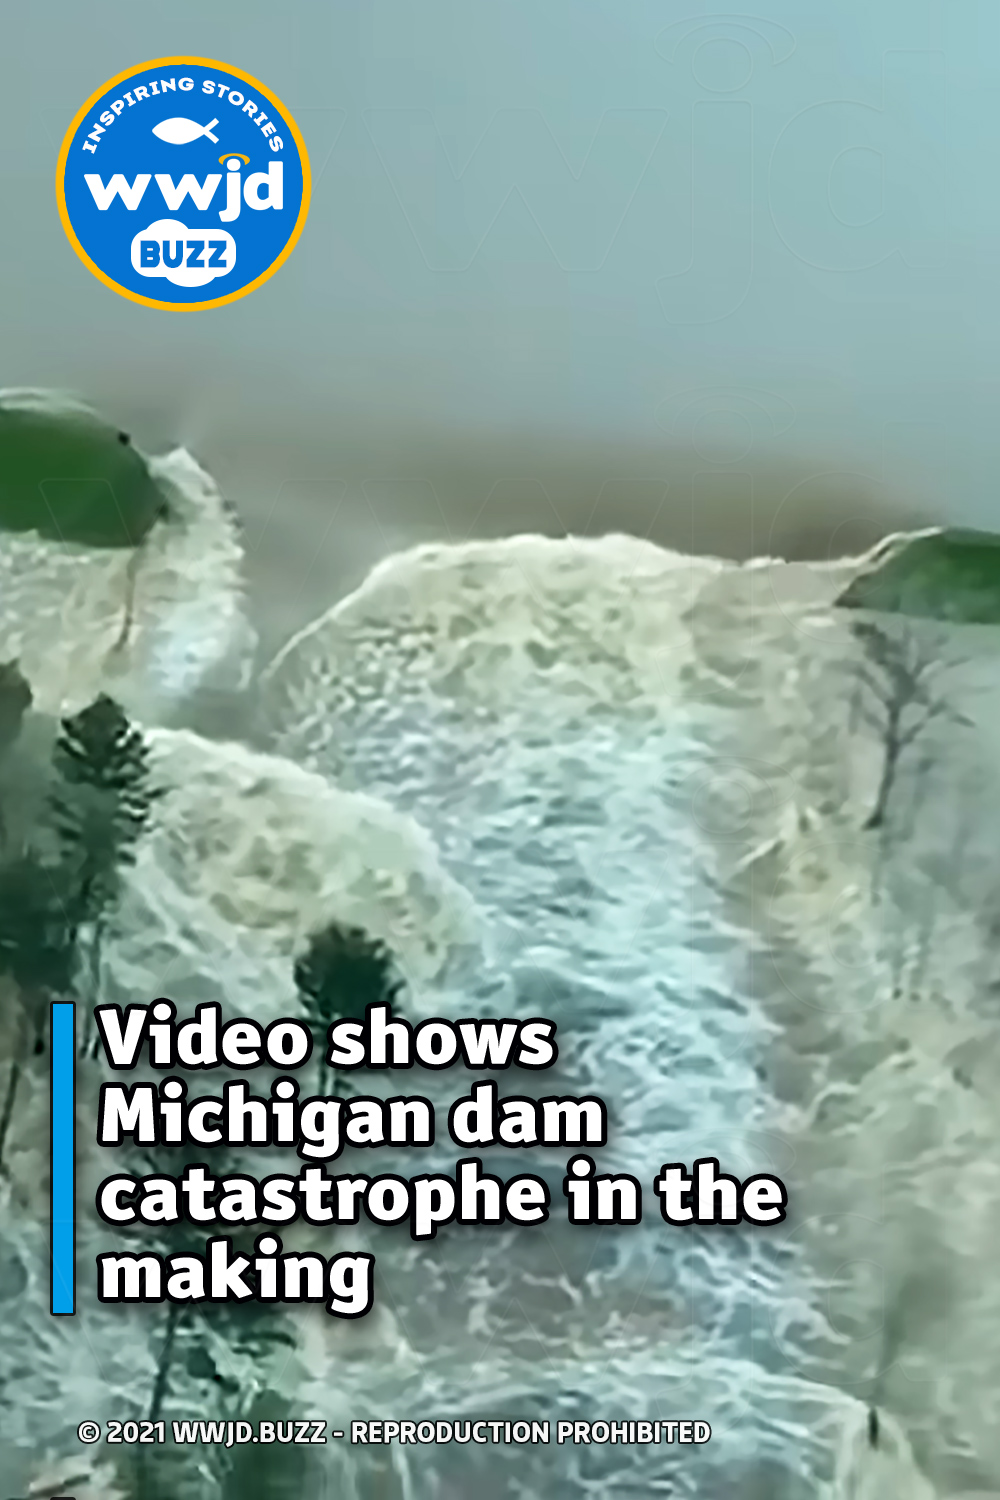 Video shows Michigan dam catastrophe in the making